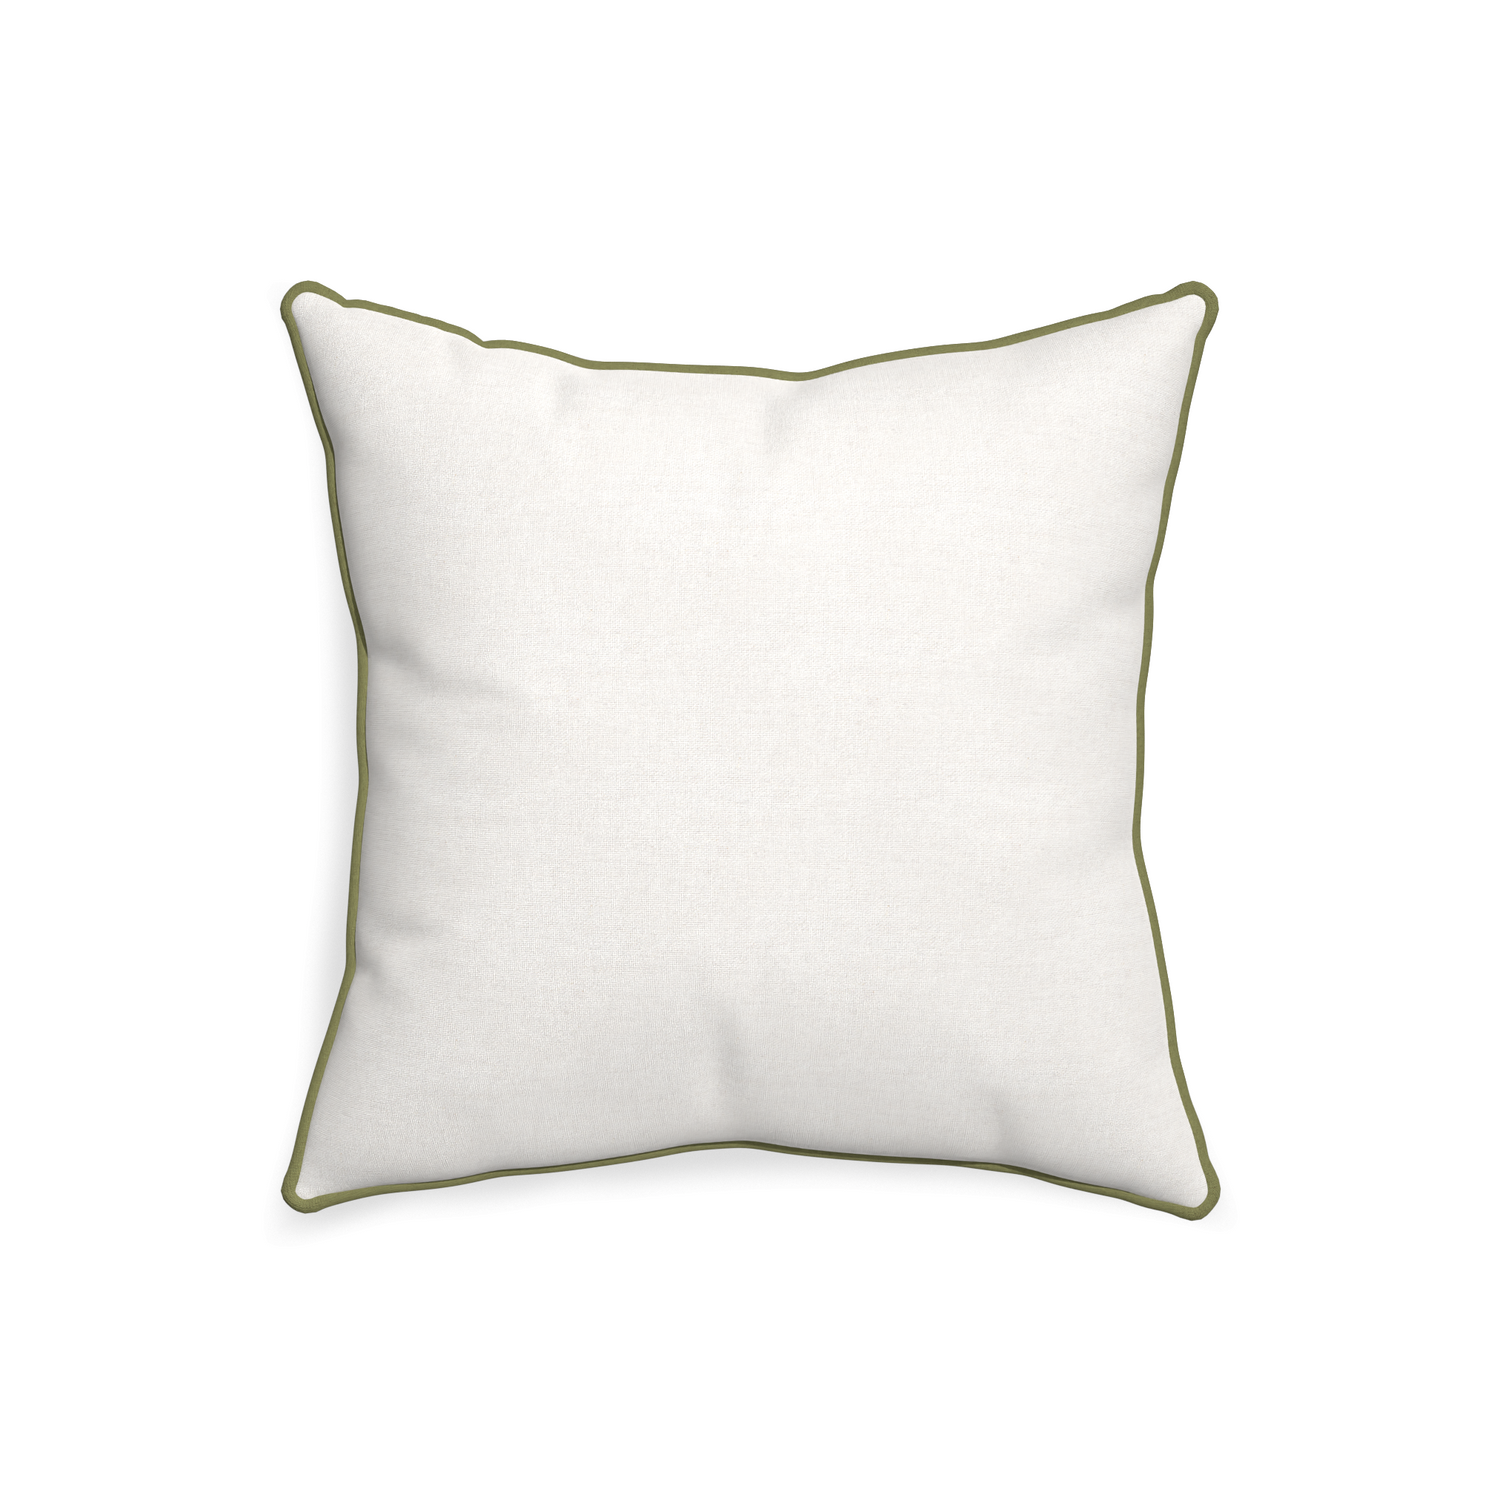 20-square flour custom pillow with moss piping on white background